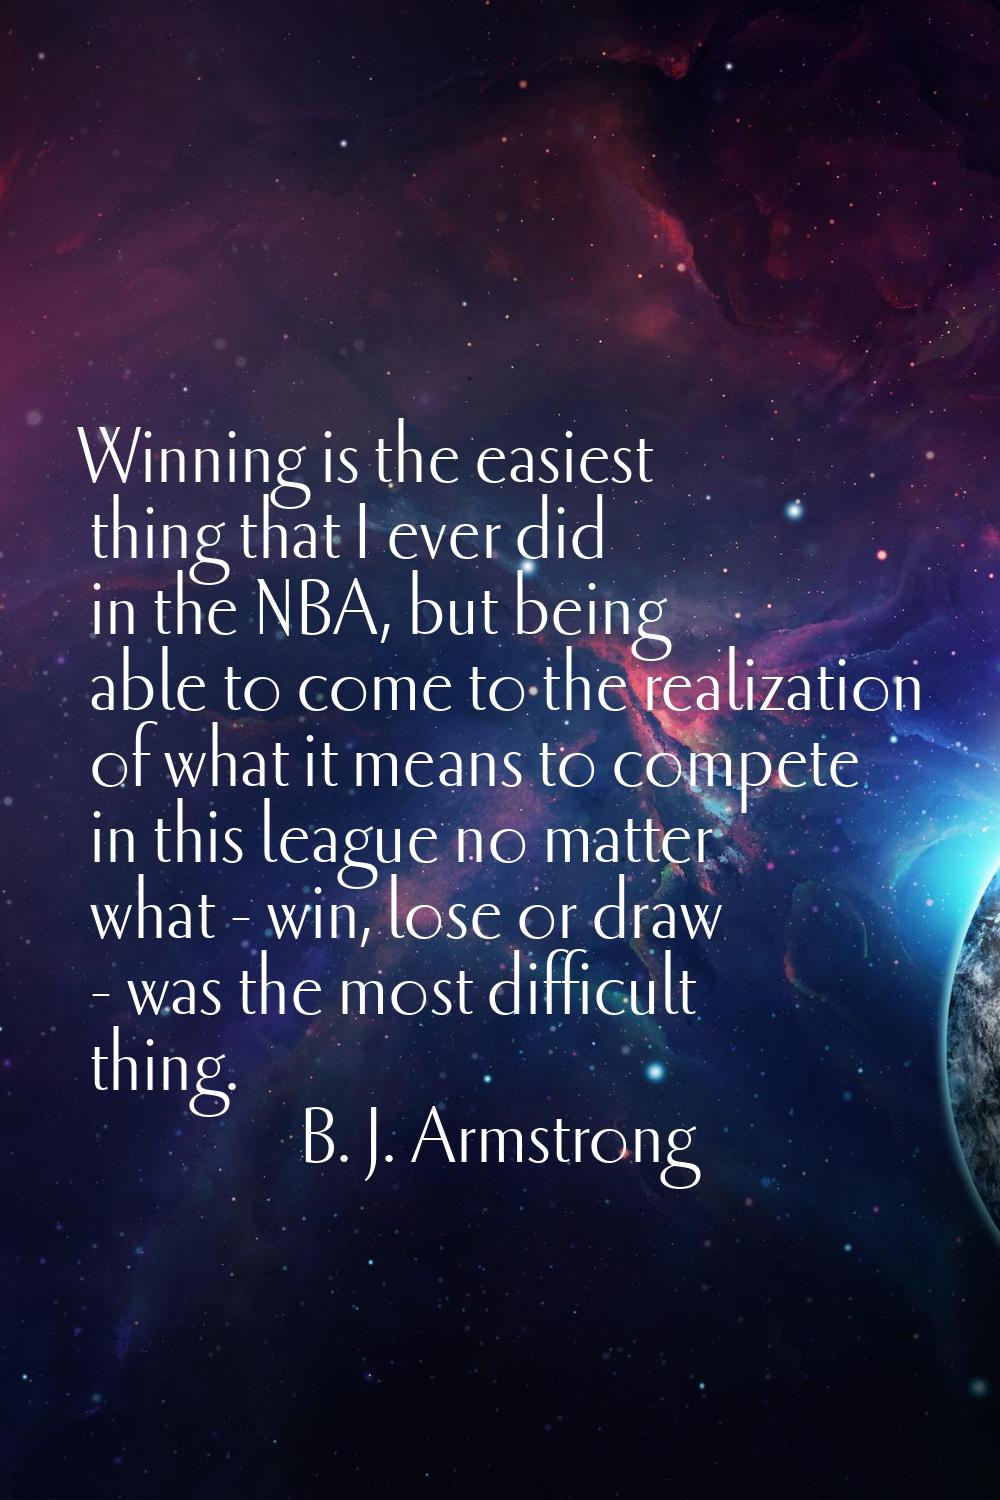 Winning is the easiest thing that I ever did in the NBA, but being able to come to the realization 